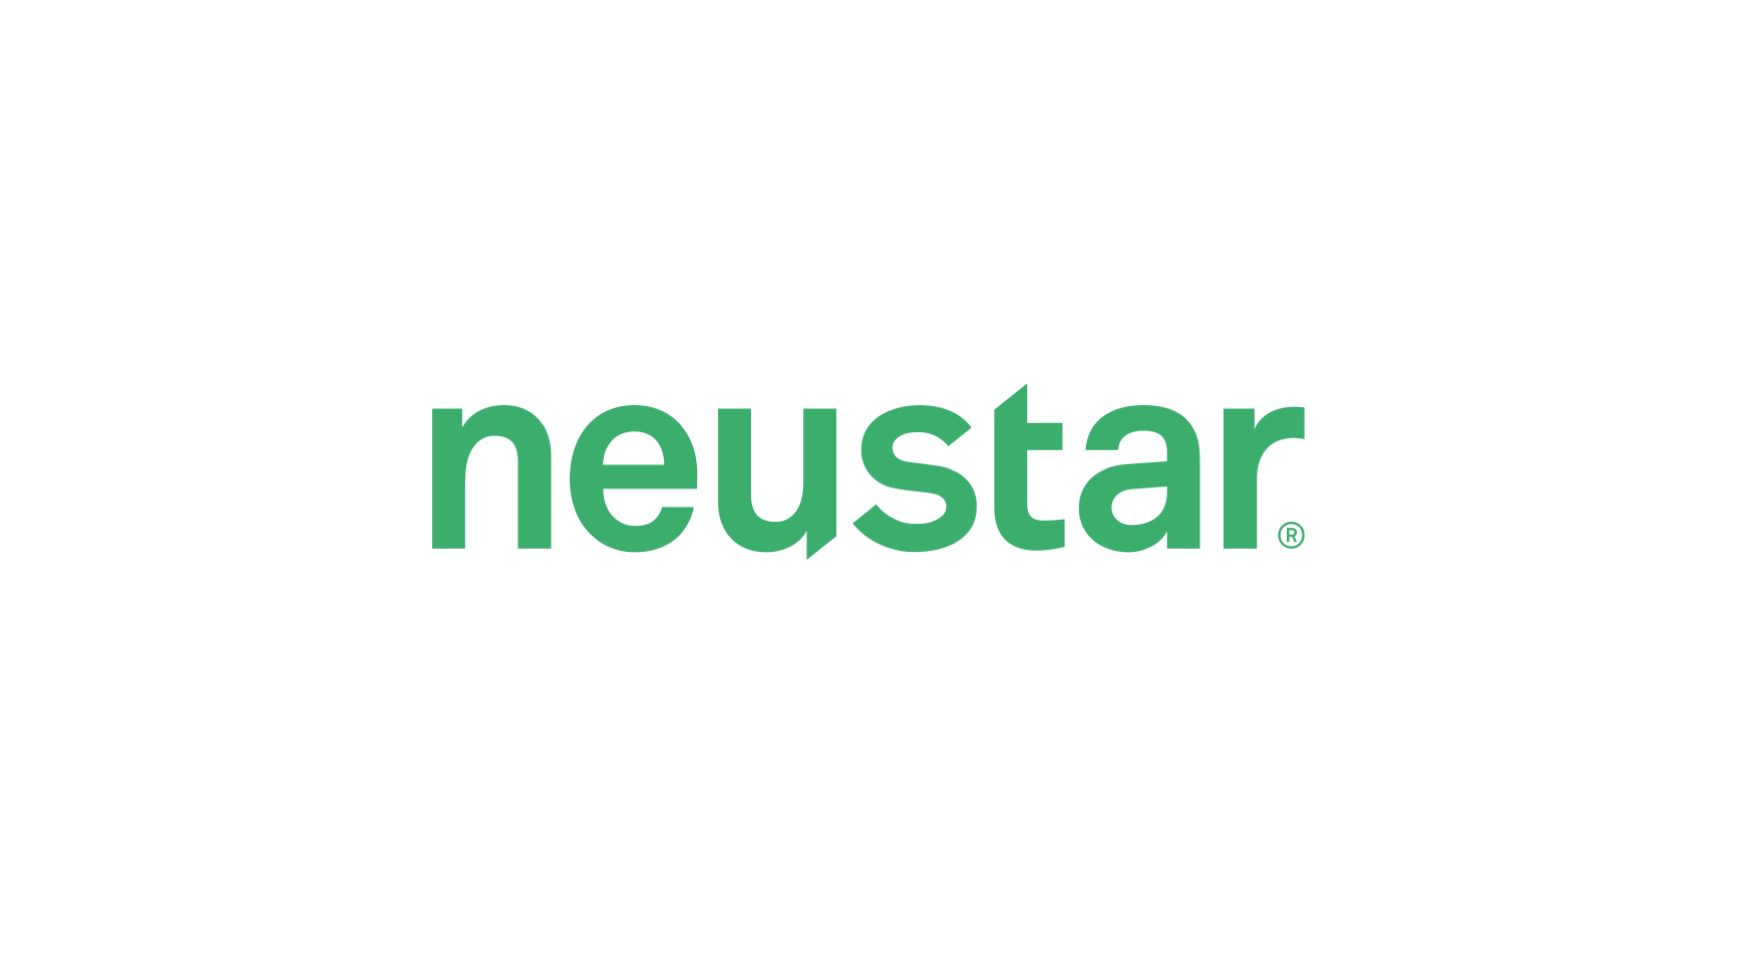 Neustar, Global Information Services Provider  and a Leader in Identity Science, Joins DPAA